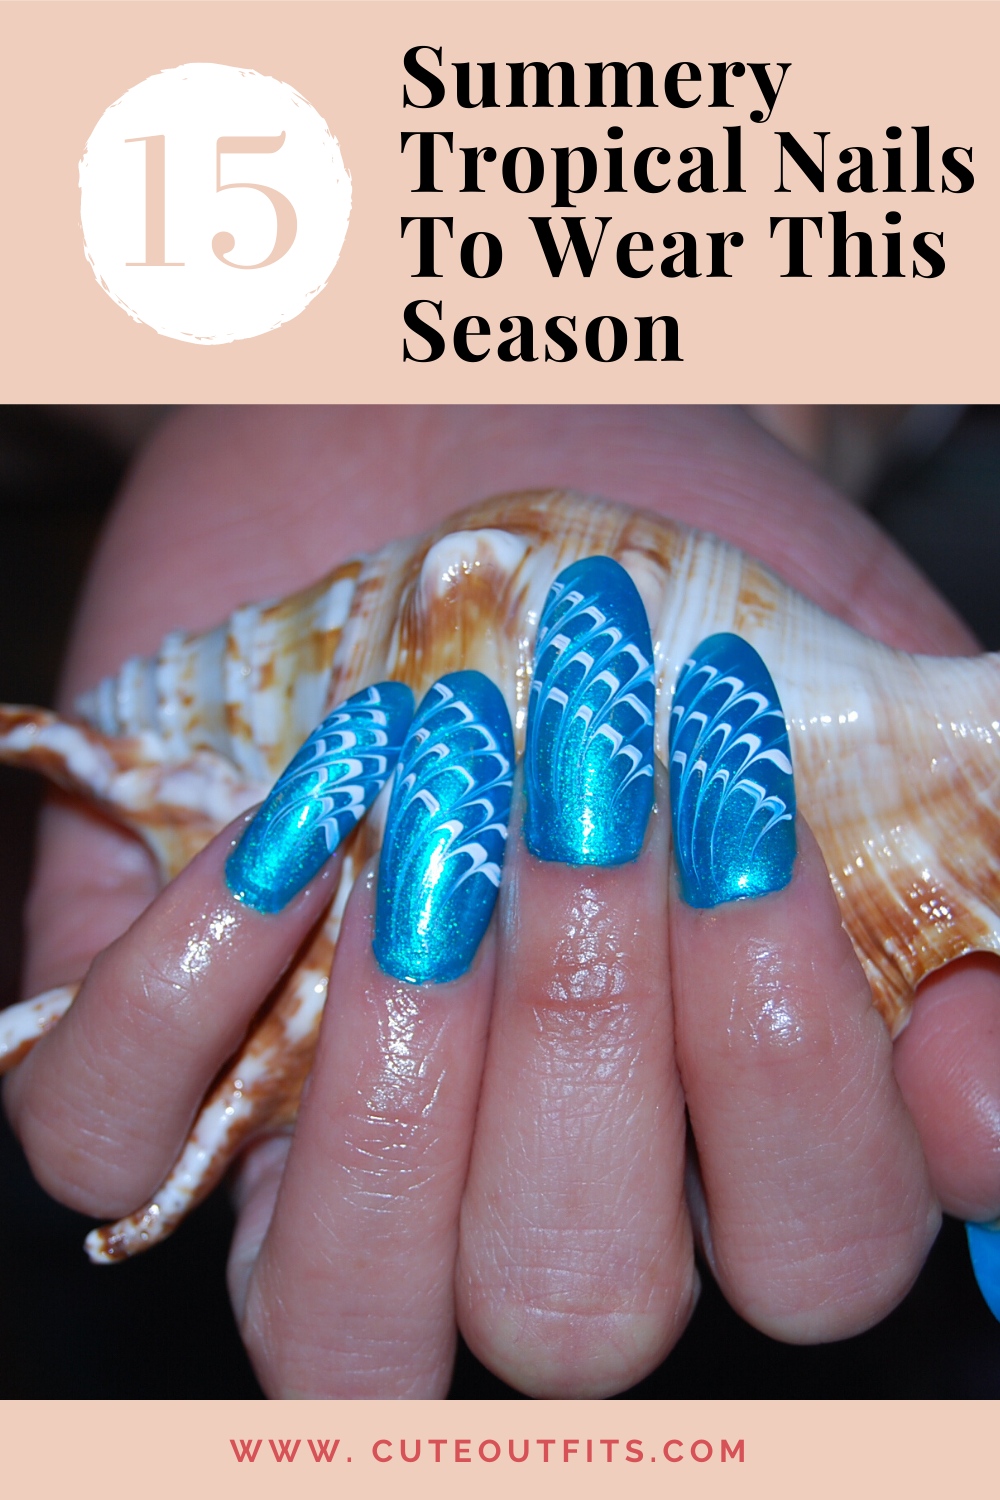 placard | 15 Summery Tropical Nails To Wear This Season [With Pics]